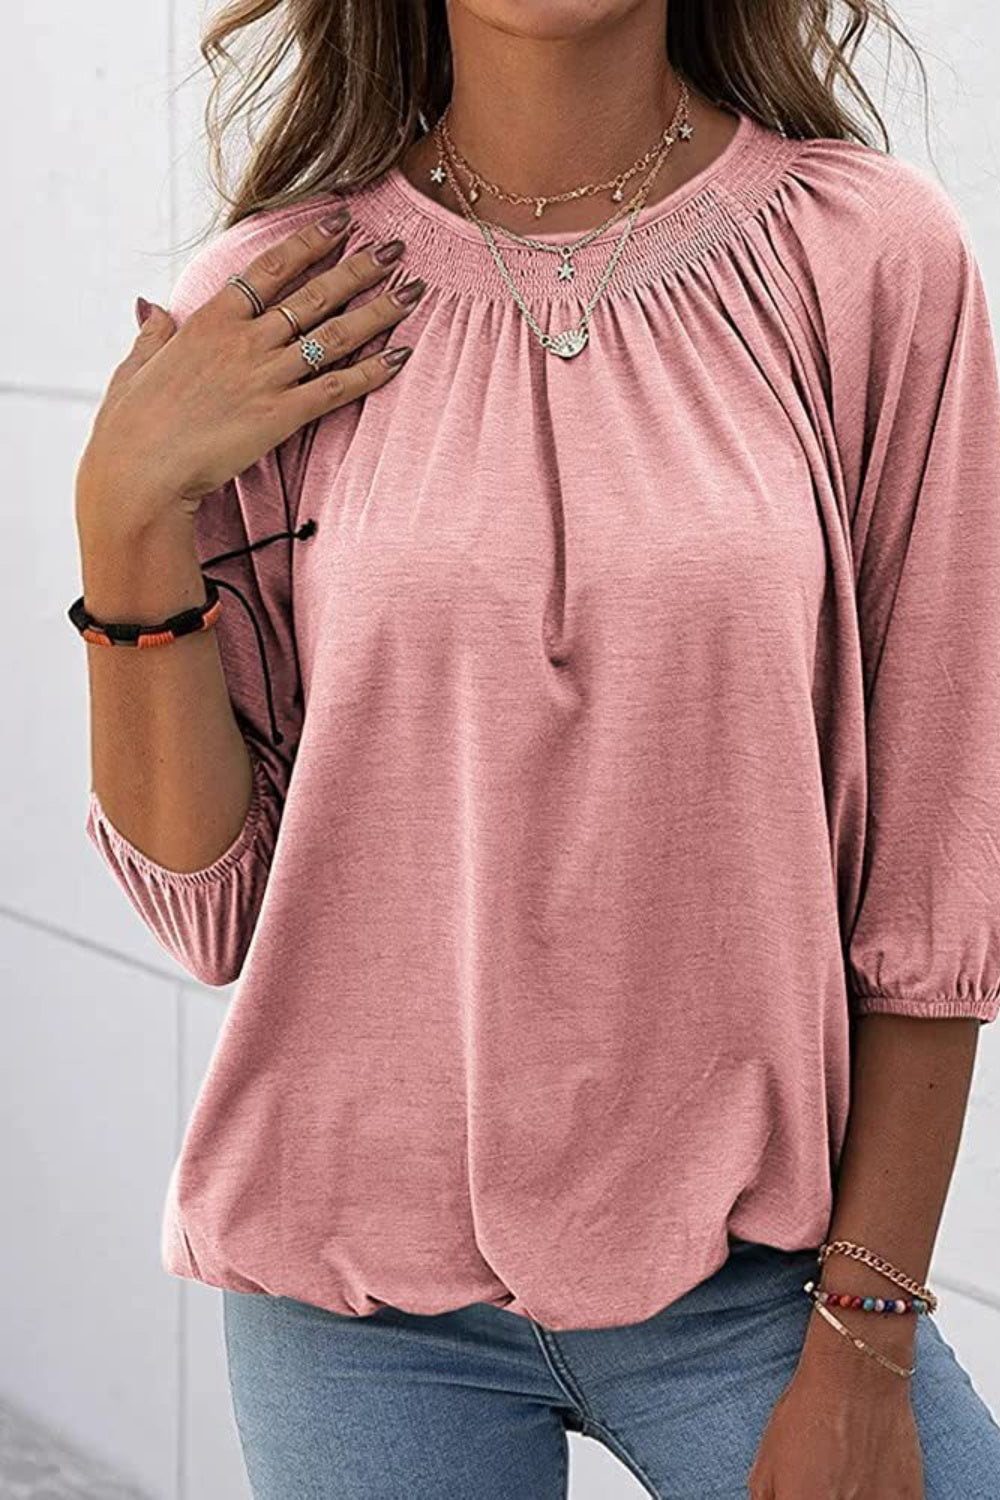 Gathered Detail Round Neck Top (8 Colors)  Krazy Heart Designs Boutique Blush Pink S 